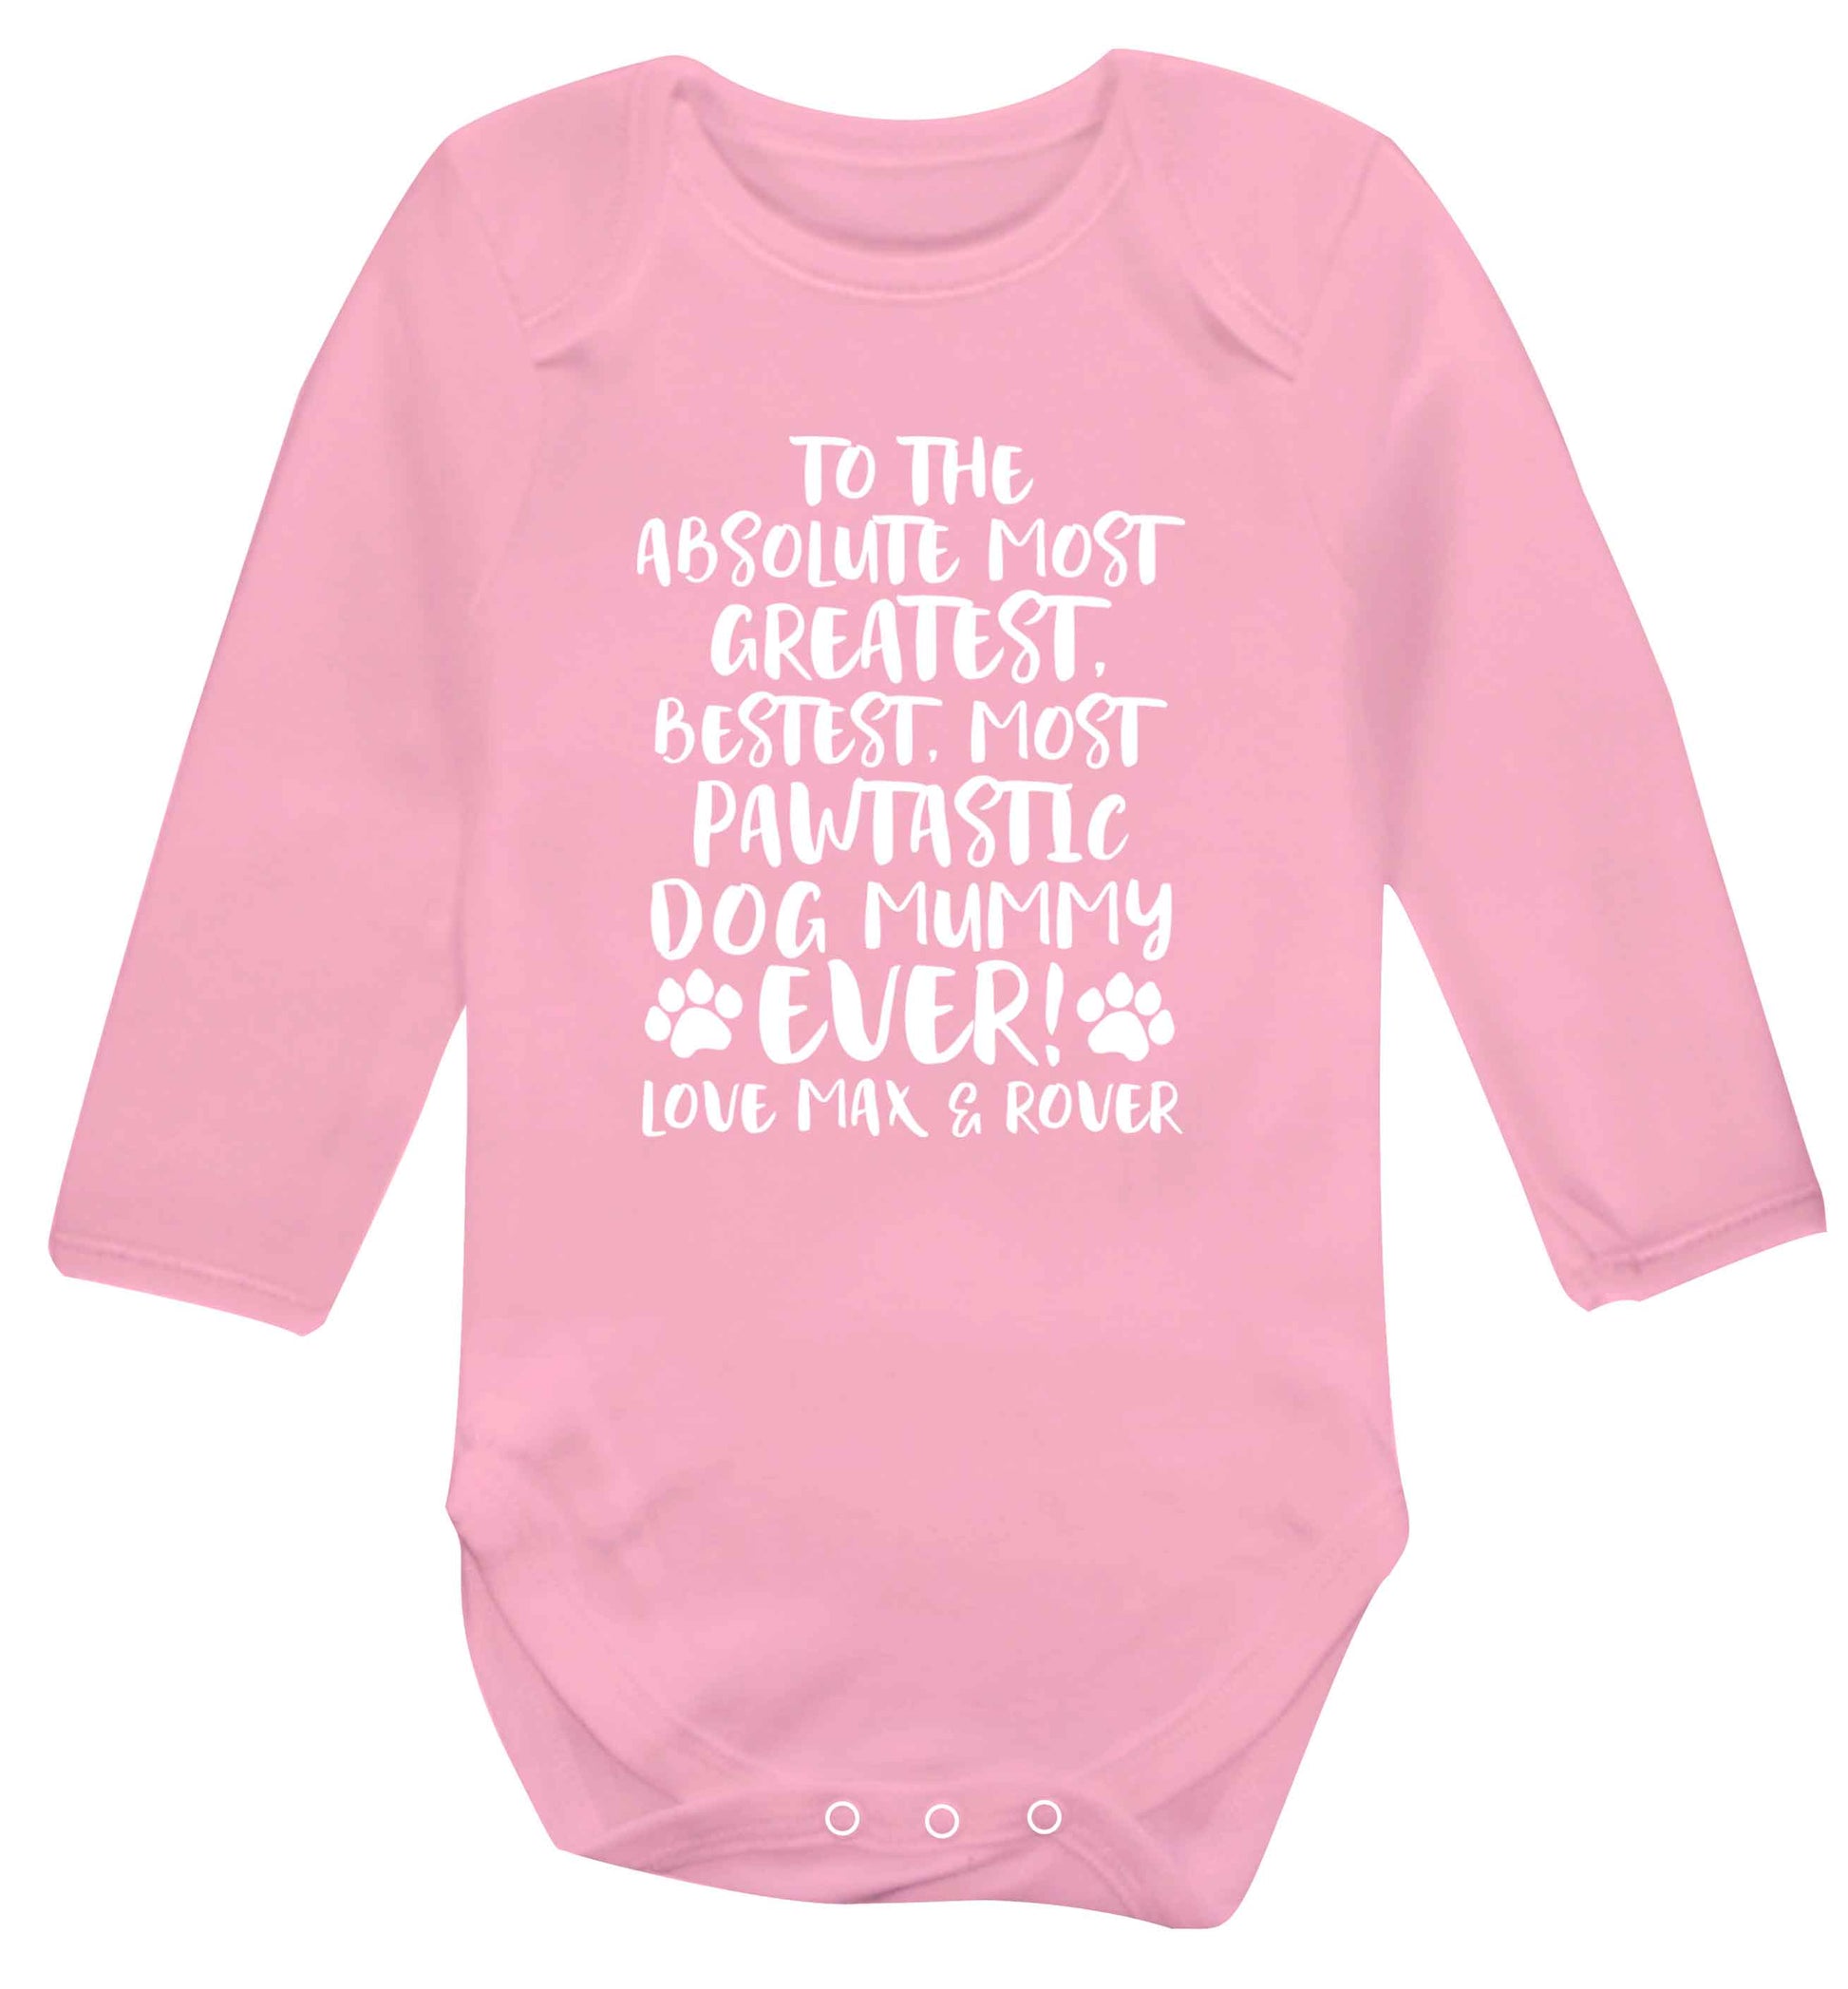 Personalsied to the most pawtastic dog mummy ever Baby Vest long sleeved pale pink 6-12 months